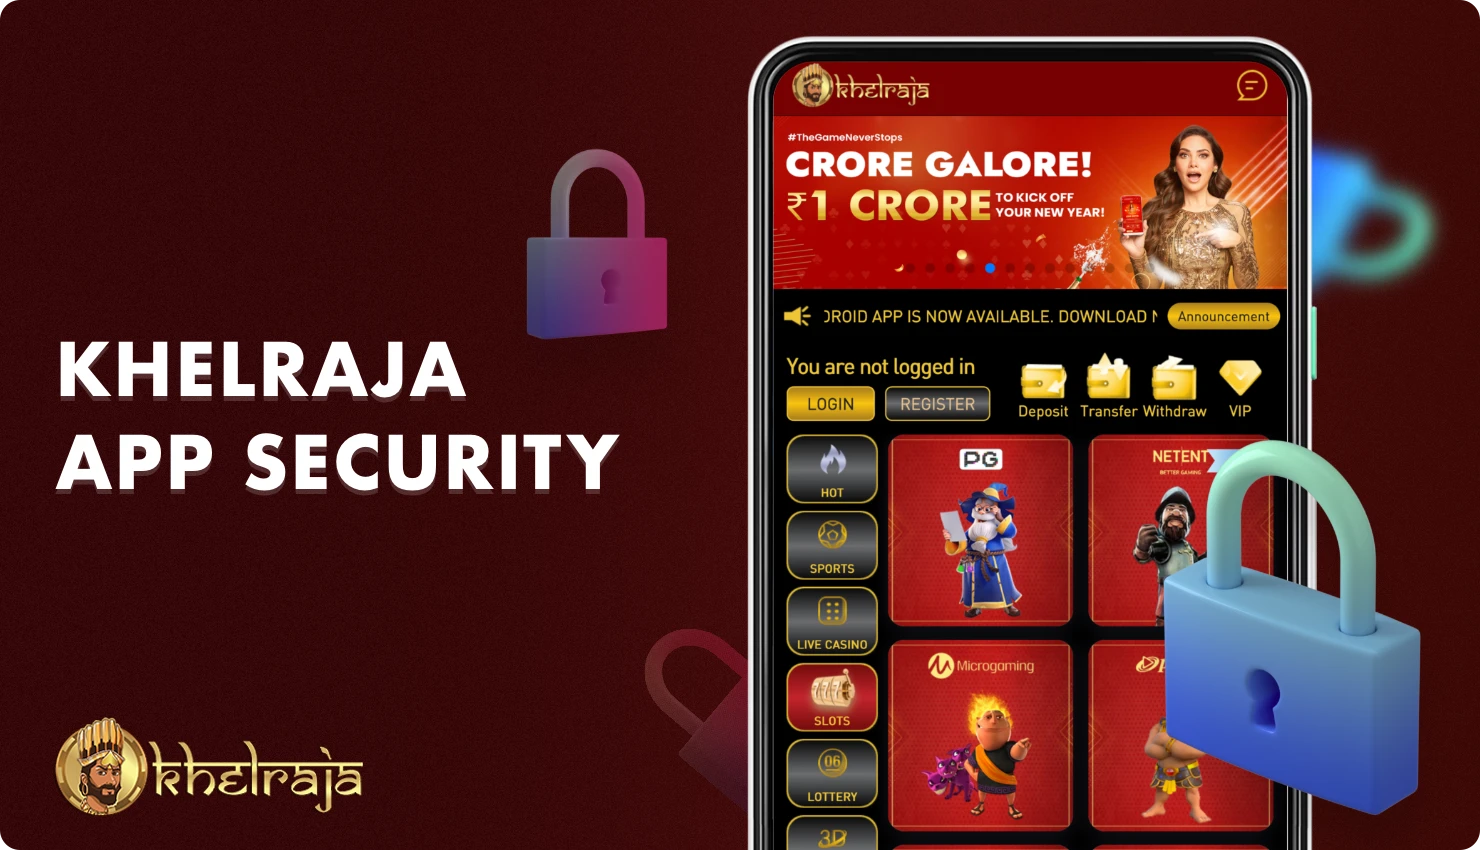 Khelraja mobile app for sports and casino betting protects its users' data